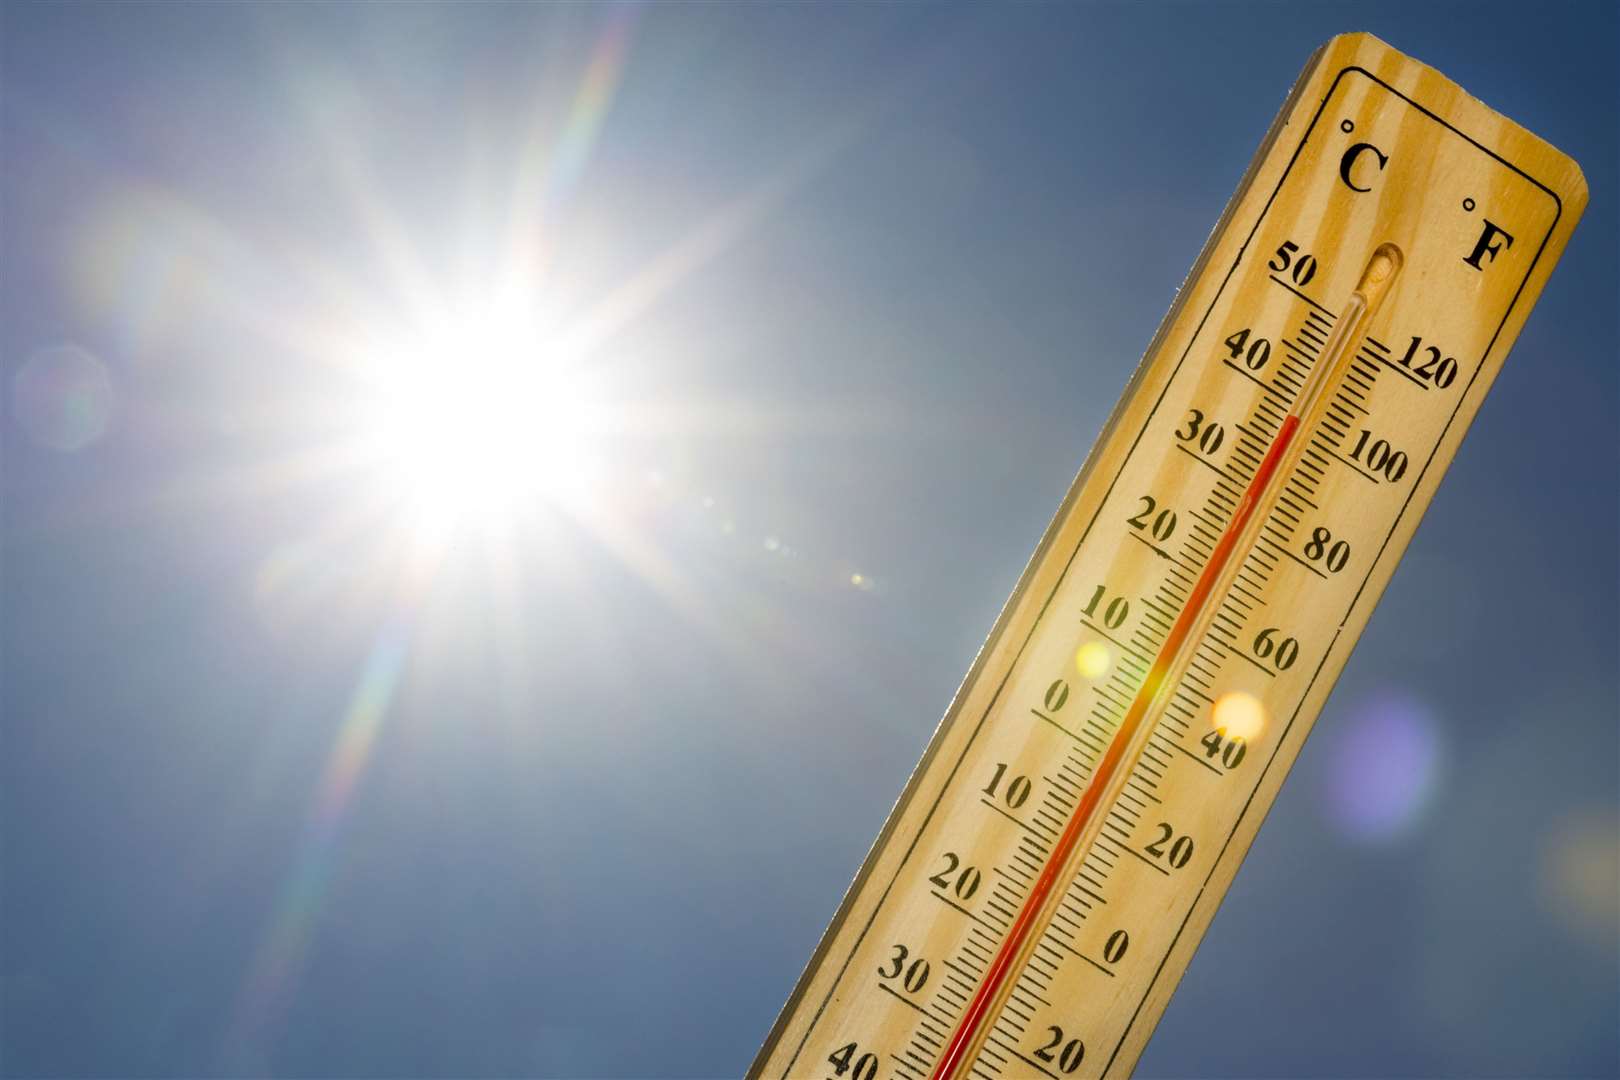 Above average temperatures are forecast for some areas